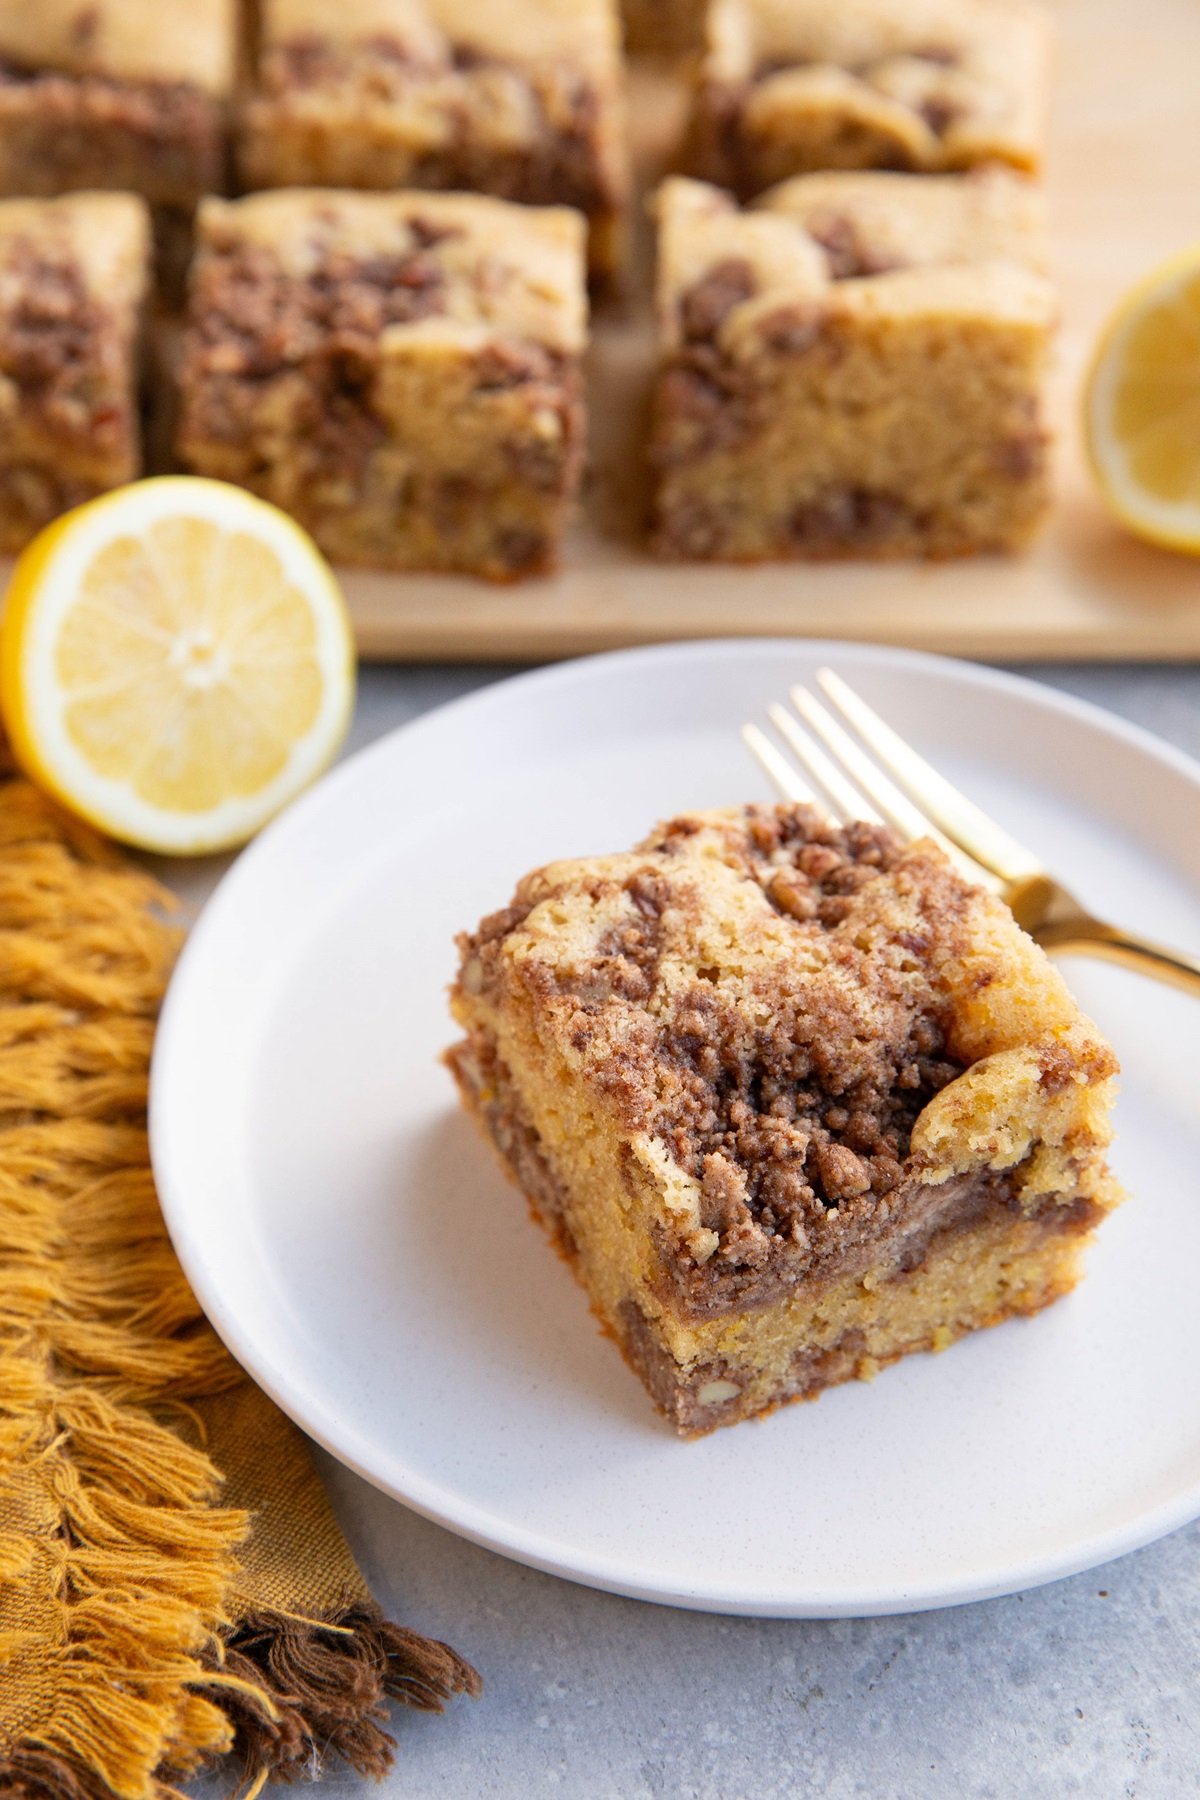 Slice of lemon coffee cake on a plate with slices of coffee cake in the background.